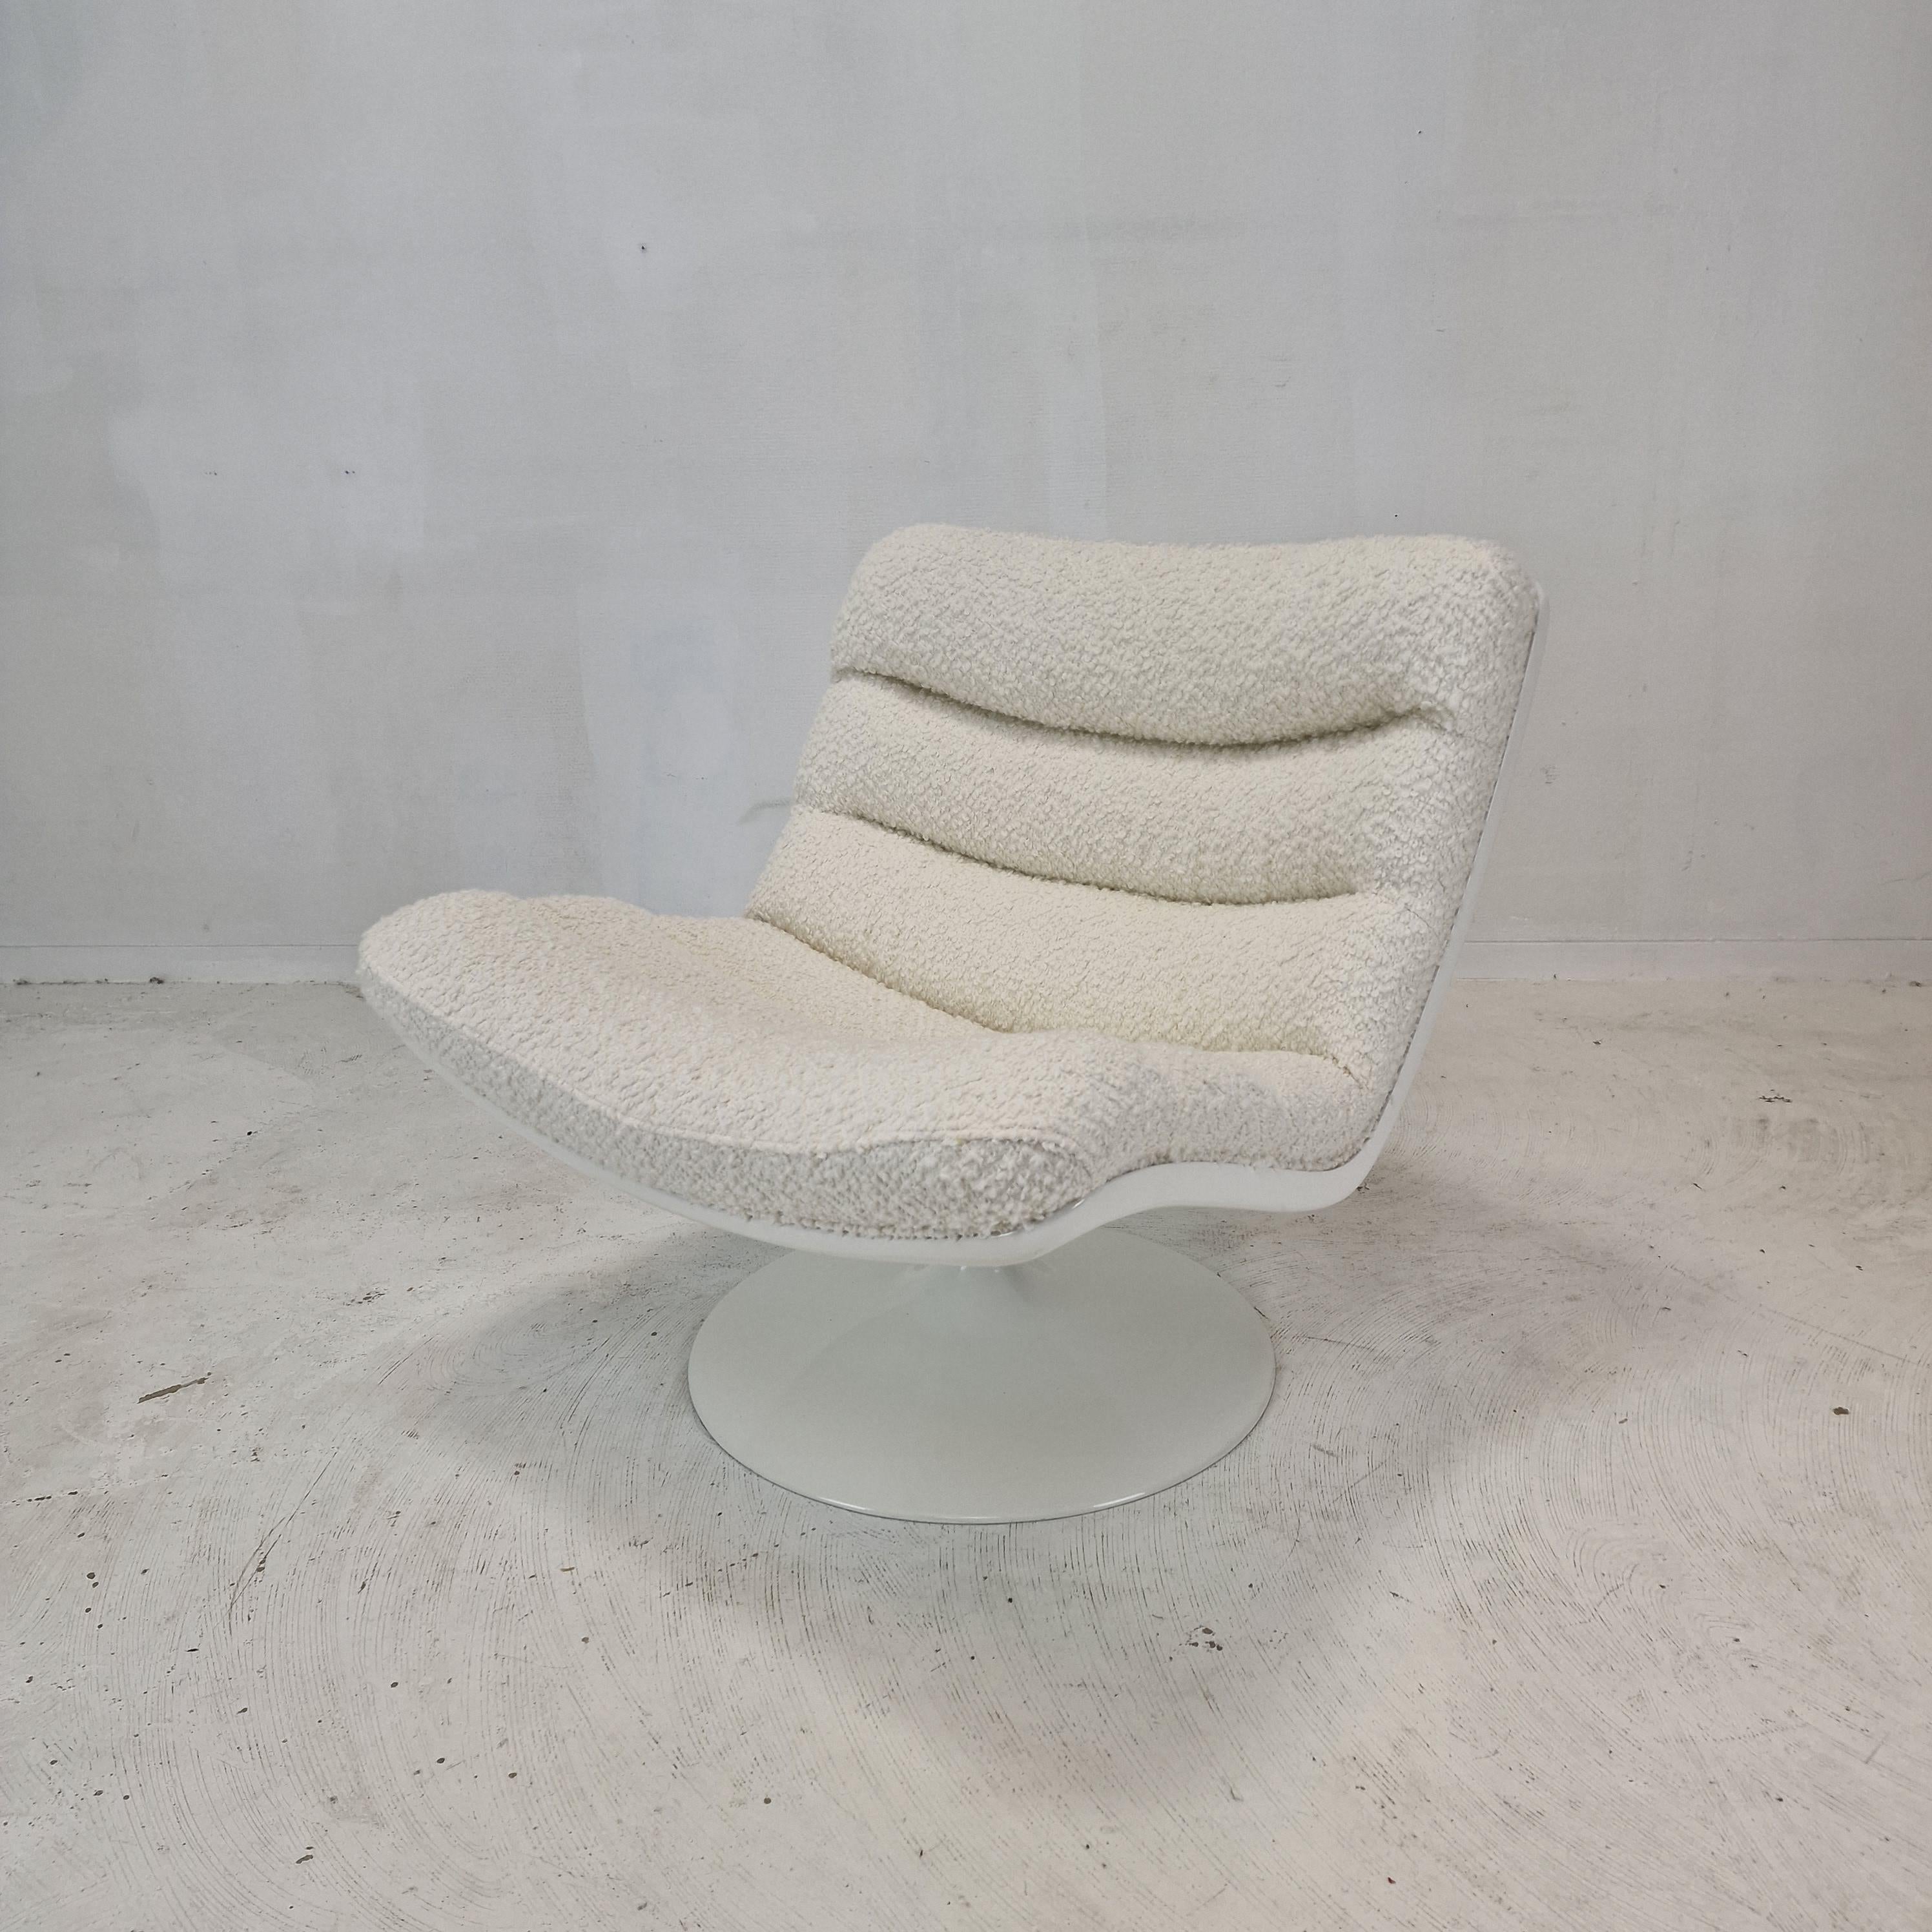 This lovely and very comfortable pivoting model 975 lounge chair is designed by Geoffrey Harcourt for Artifort in the 60s., 

It is just restored with new stunning and very soft Alpaca wool bouclé fabric. 

The foot and the base are painted by a